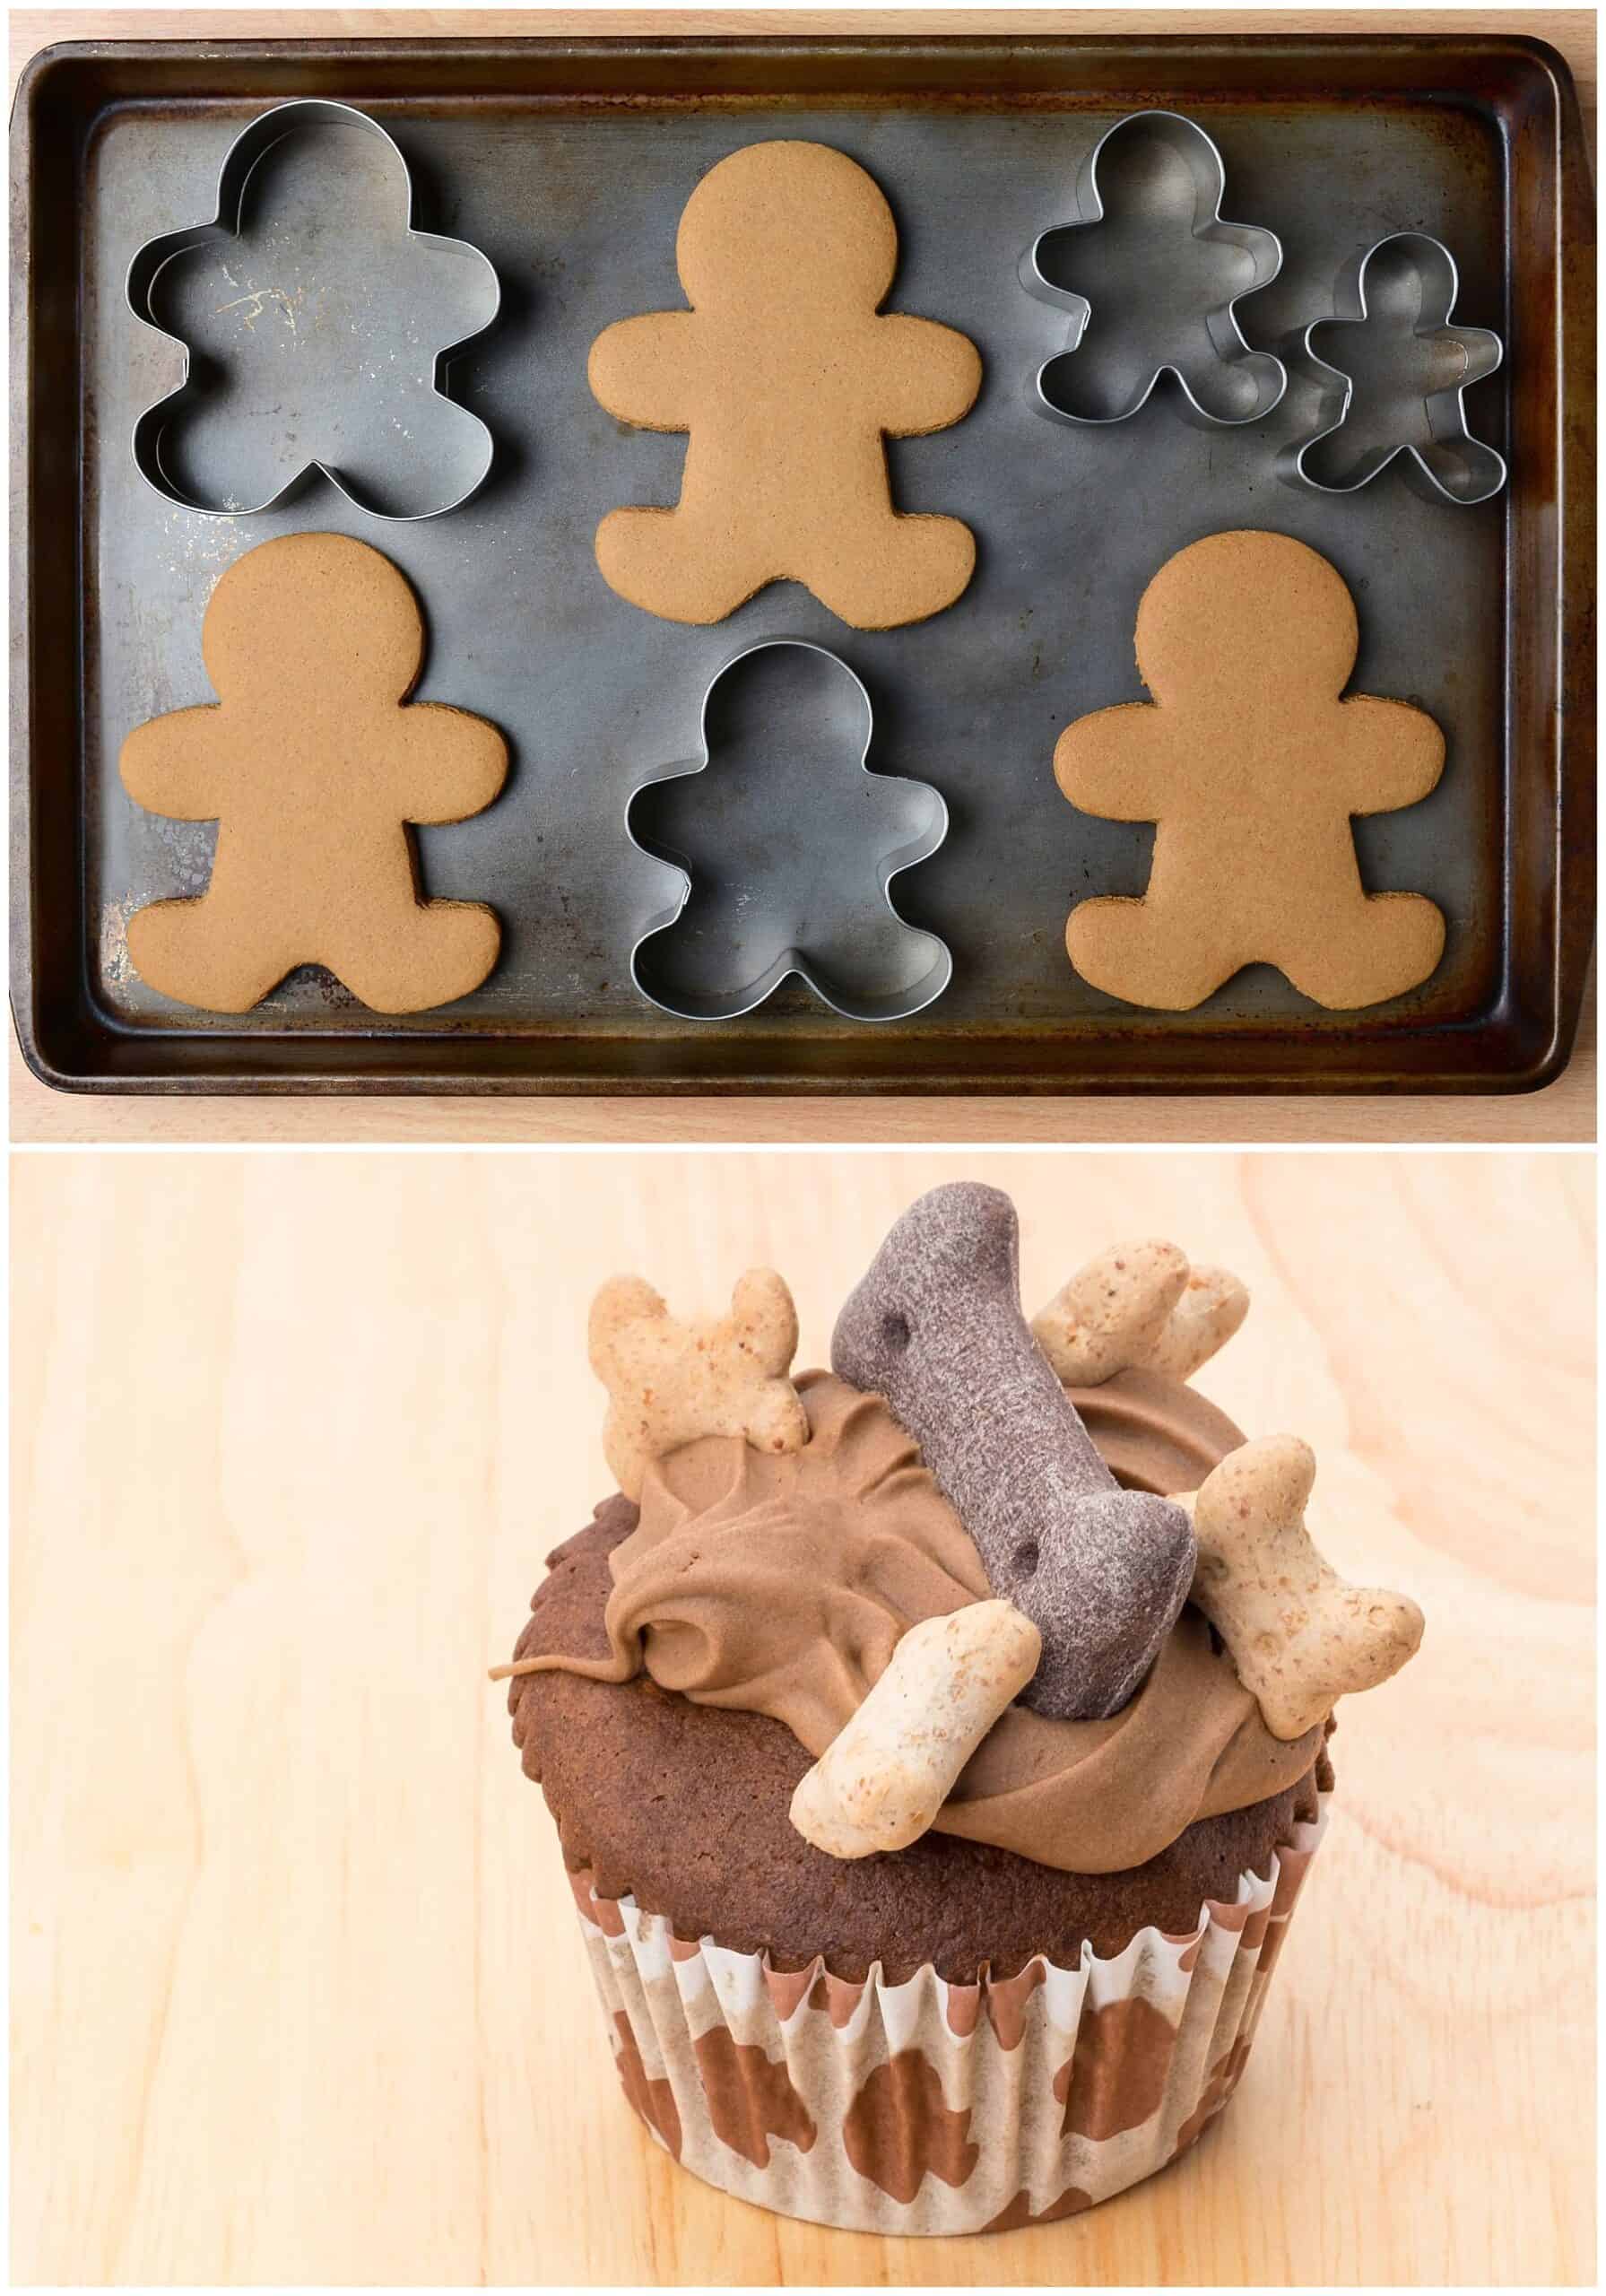 fun cookie cutters to make homemade dog treats with